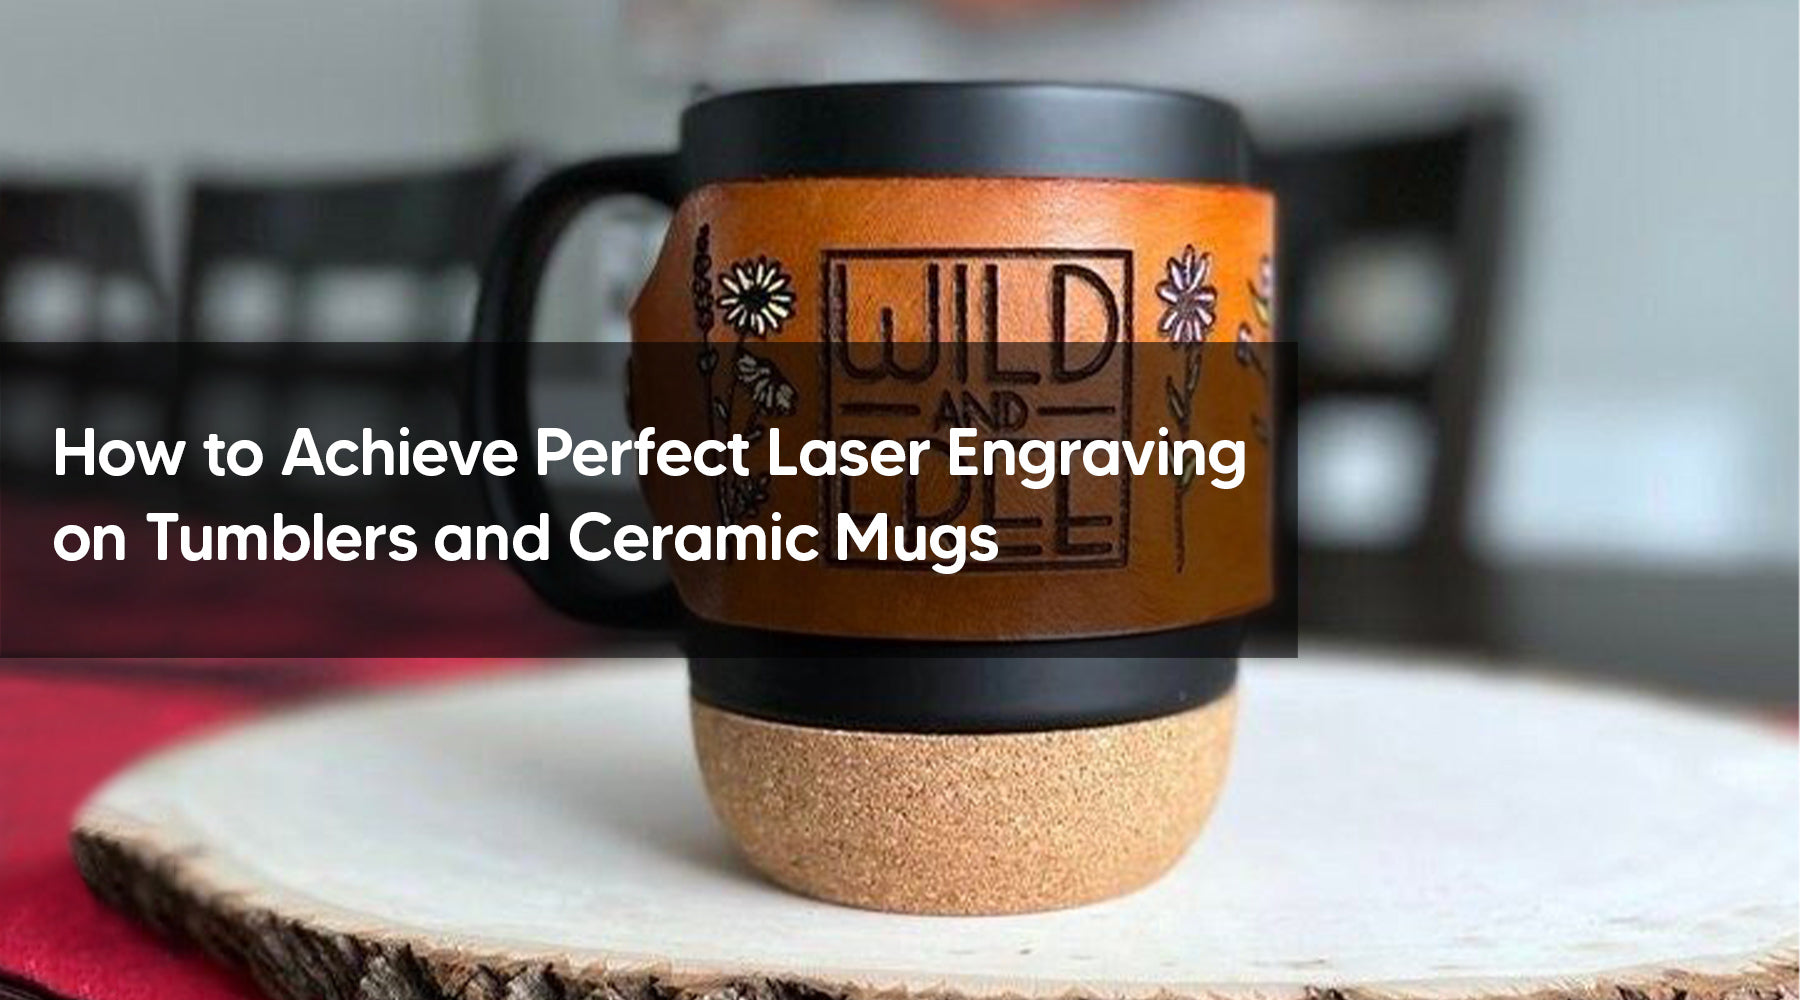 How to Achieve Perfect Laser Engraving on Tumblers and Ceramic Mugs